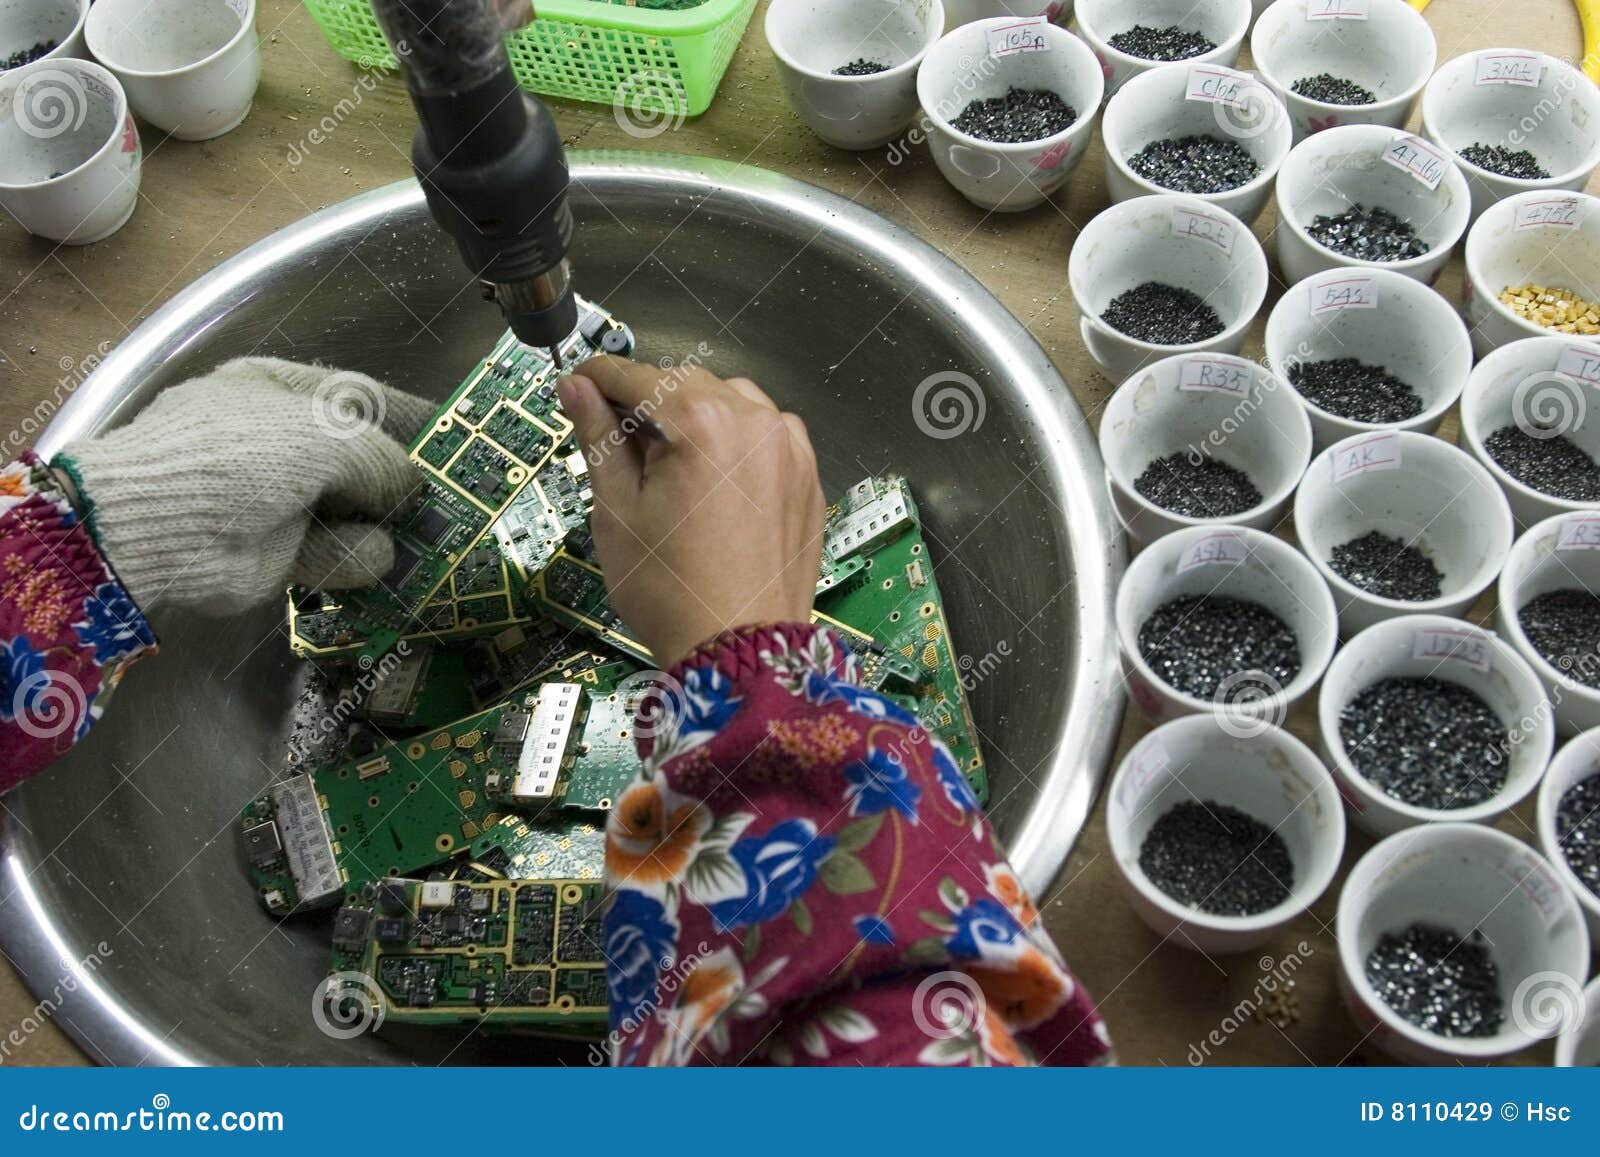 e-waste in china